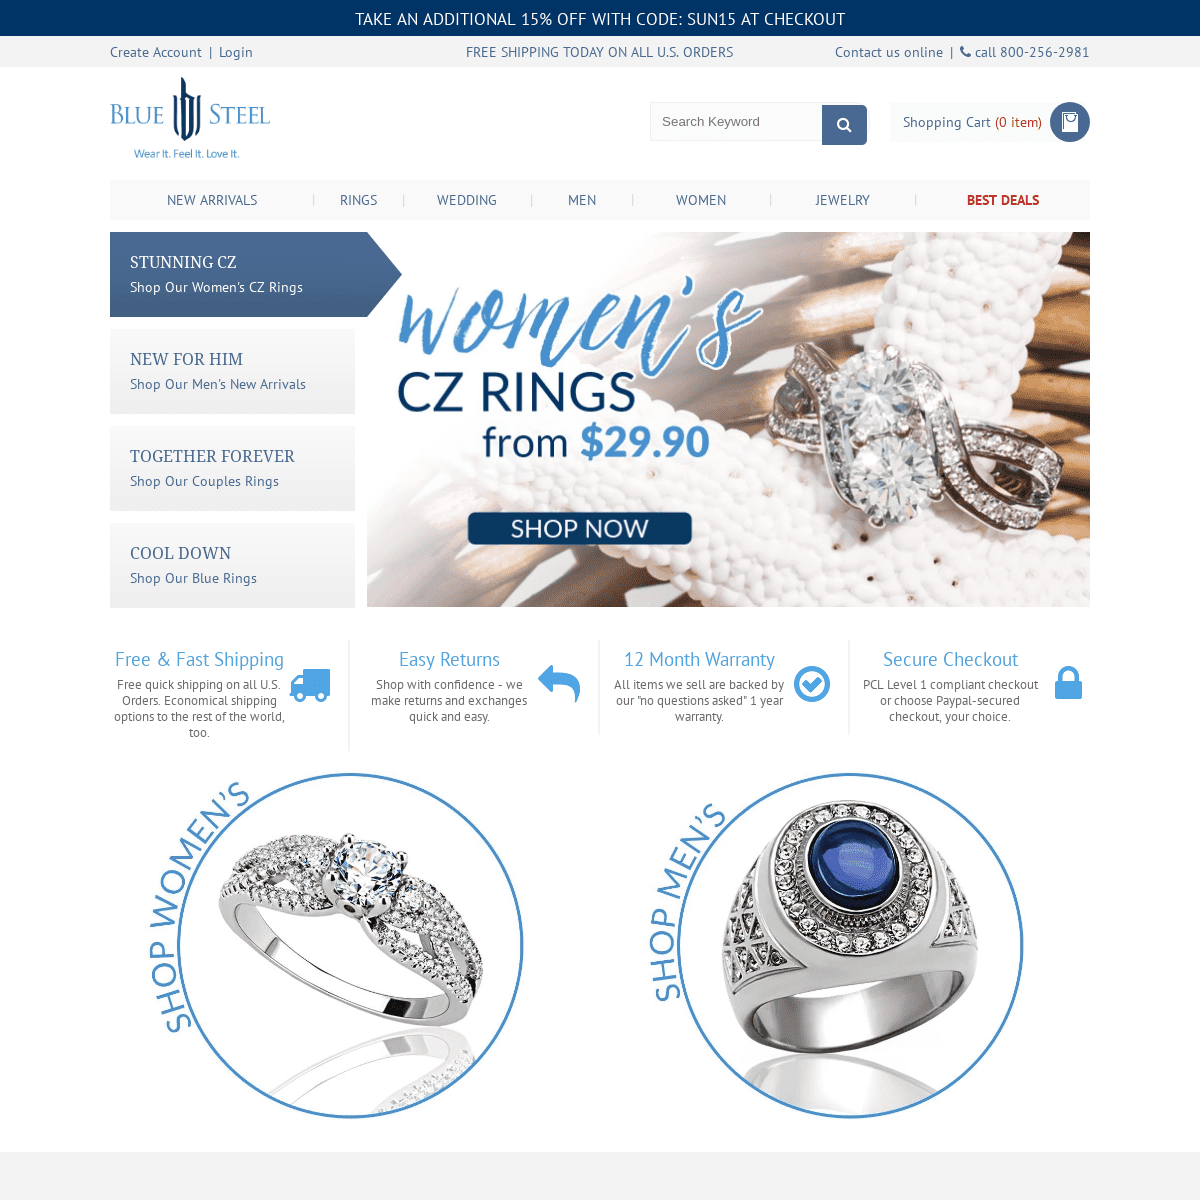 Stainless Steel, Tungsten, Sterling Silver and Titanium Jewelry | Blue Steel Jewelry